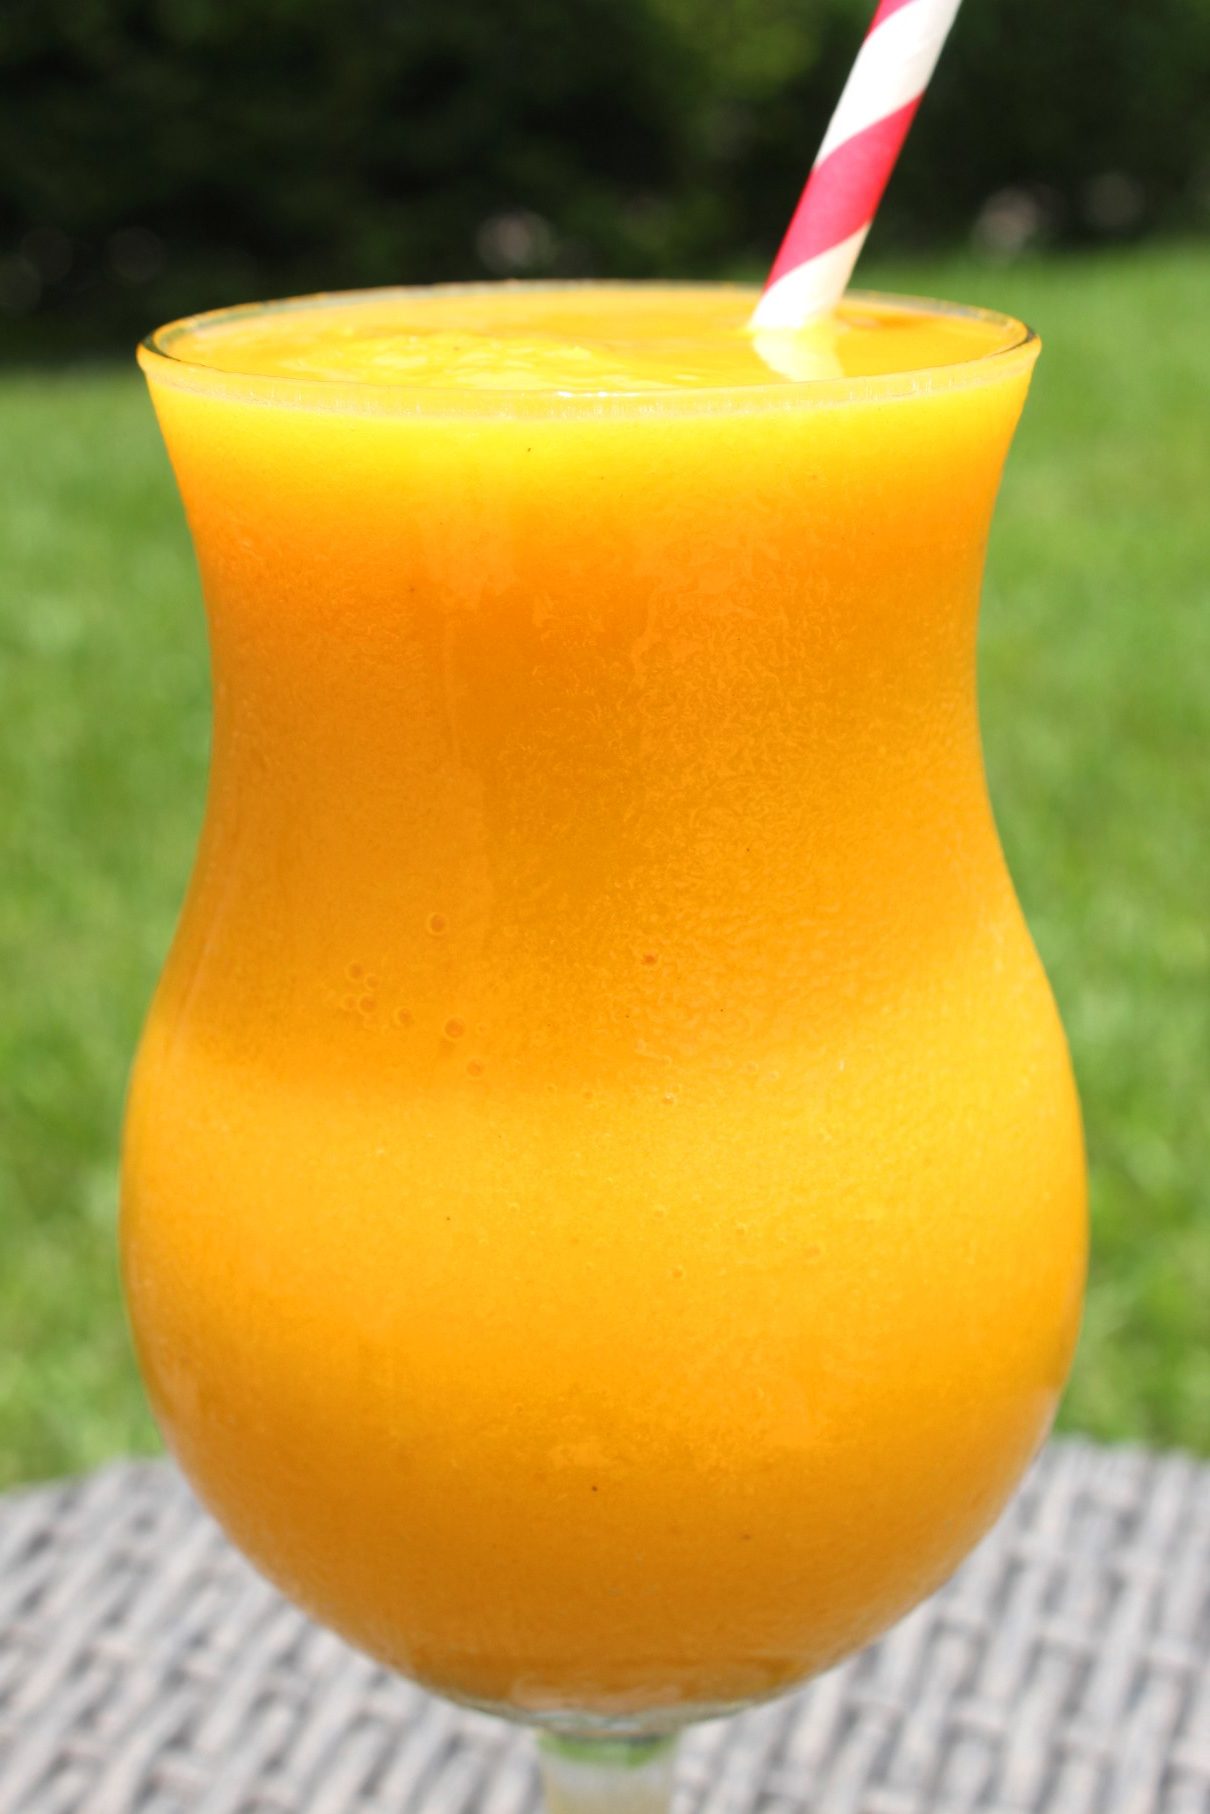 A glass of a yellow/orange frozen cocktail with a paper straw